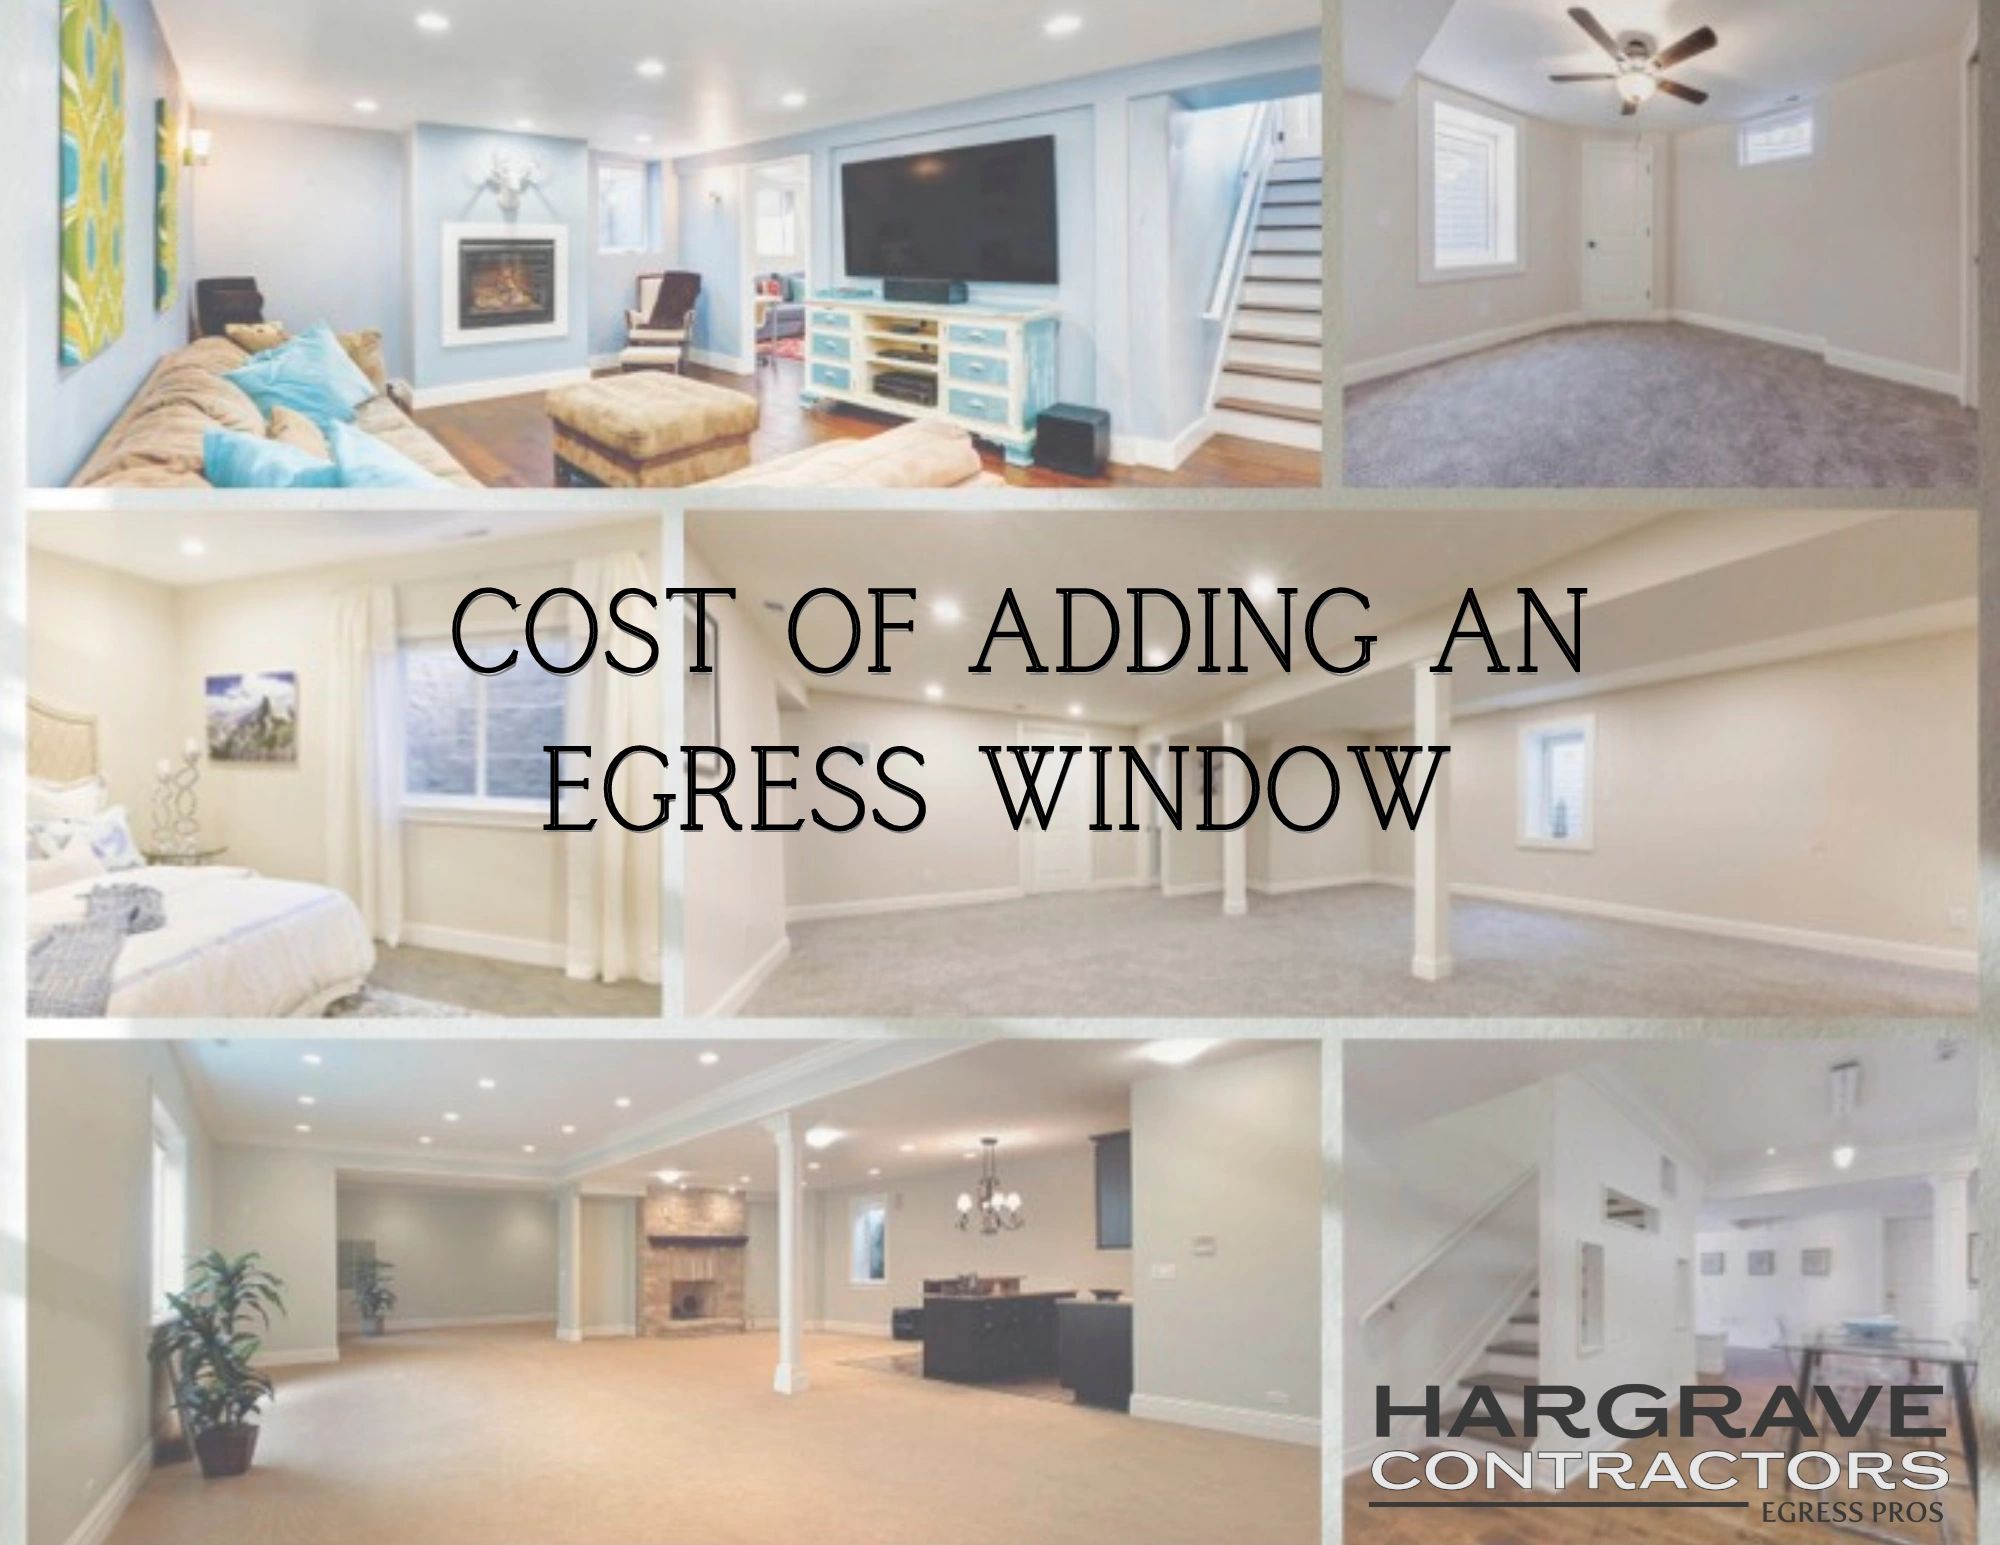 How much does an Egress window cost?